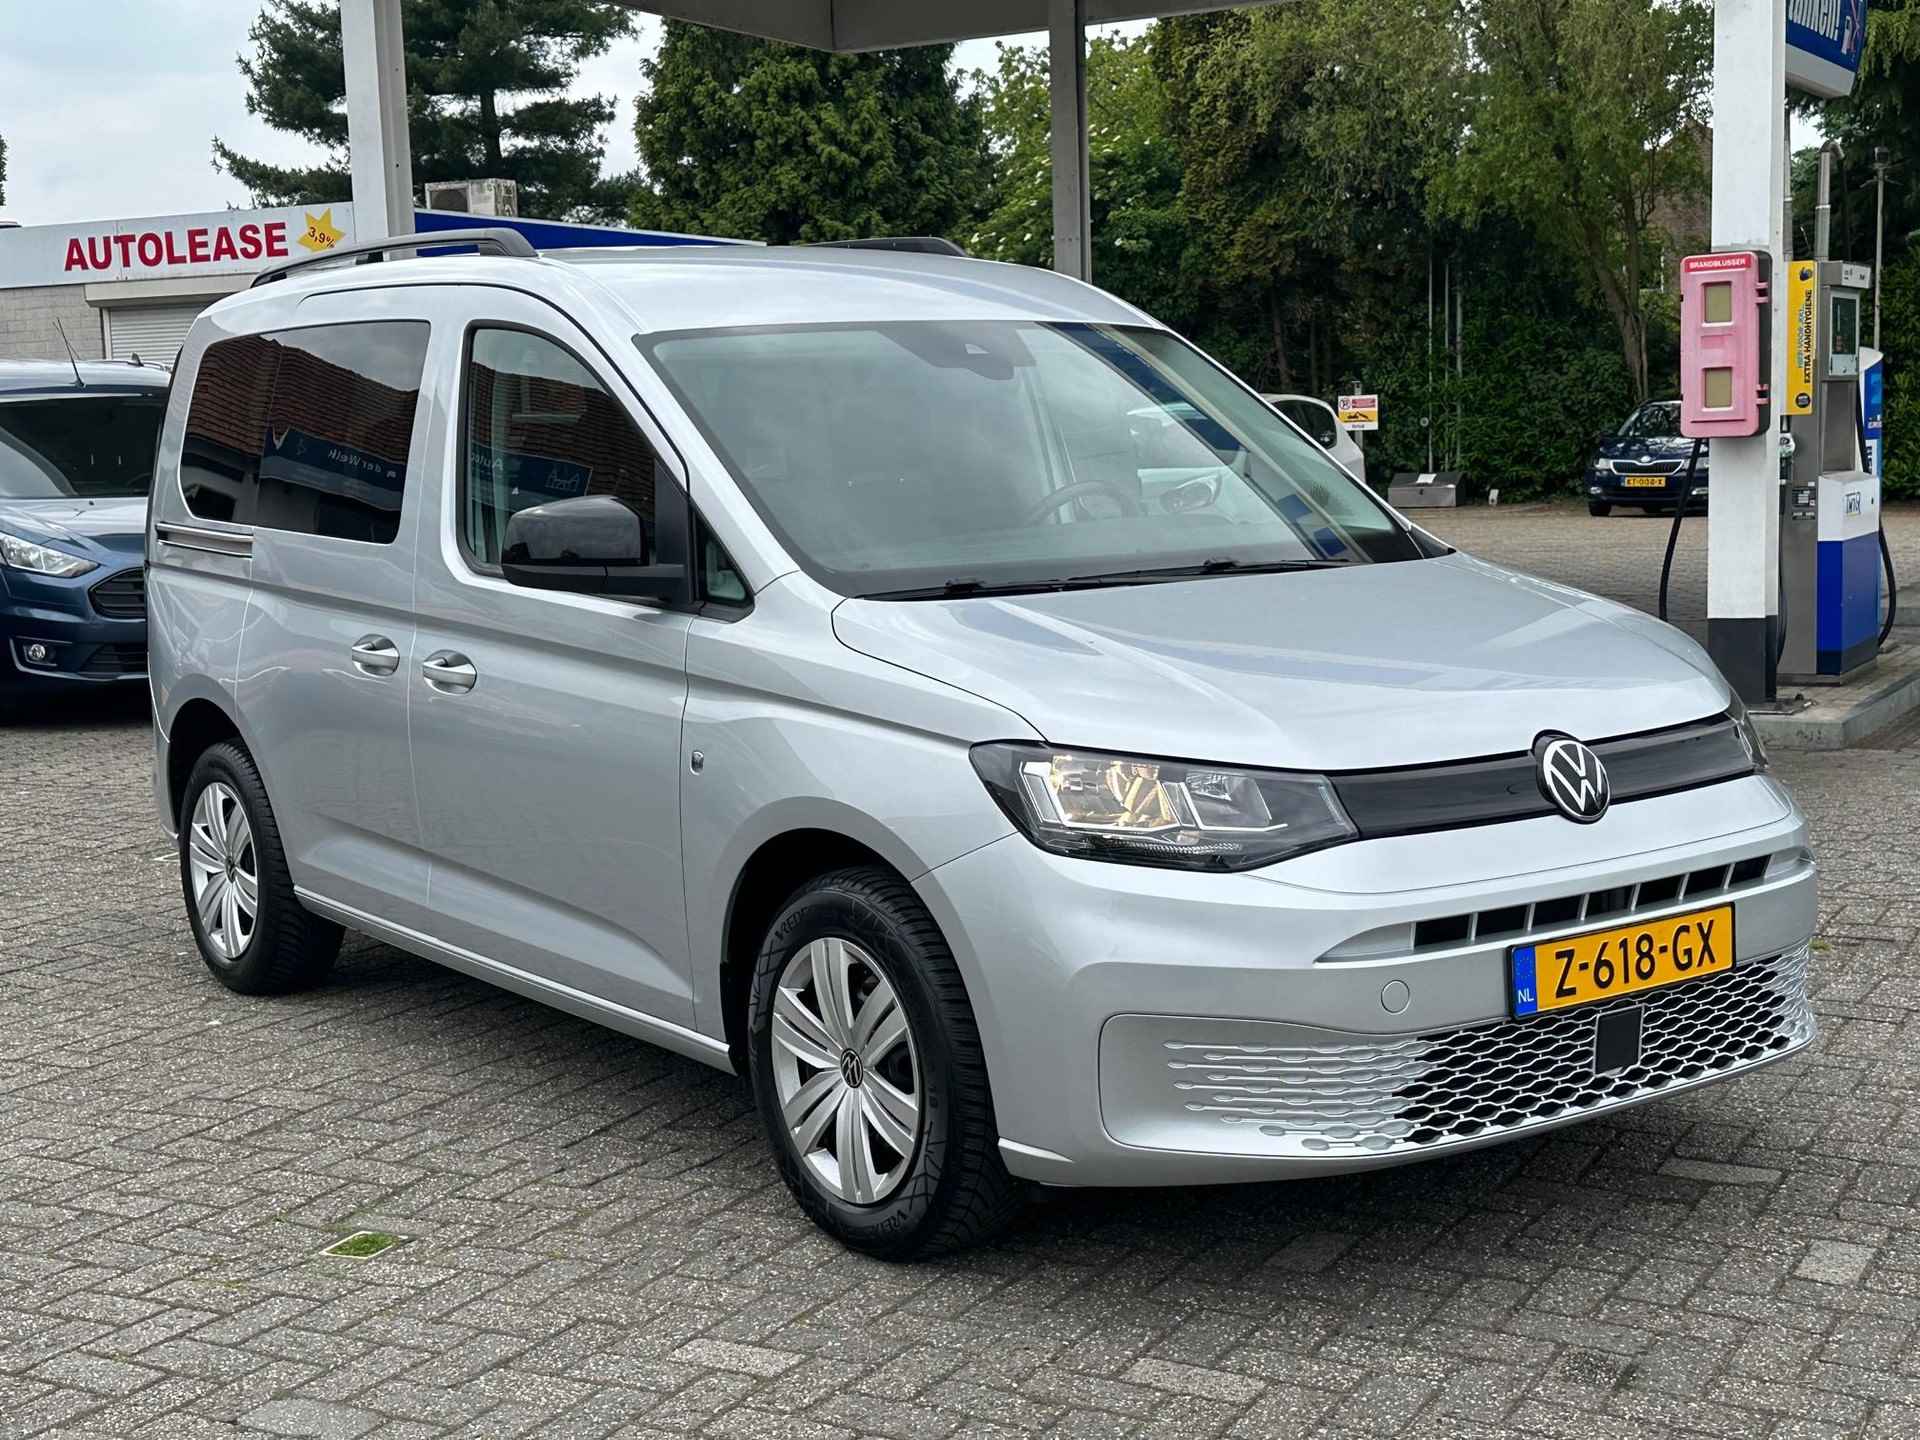 Volkswagen Caddy 1.4 TSI 5p AUTOMAAT! CARPLAY | CRUISE CONTROL | BOVAG!! - 9/30